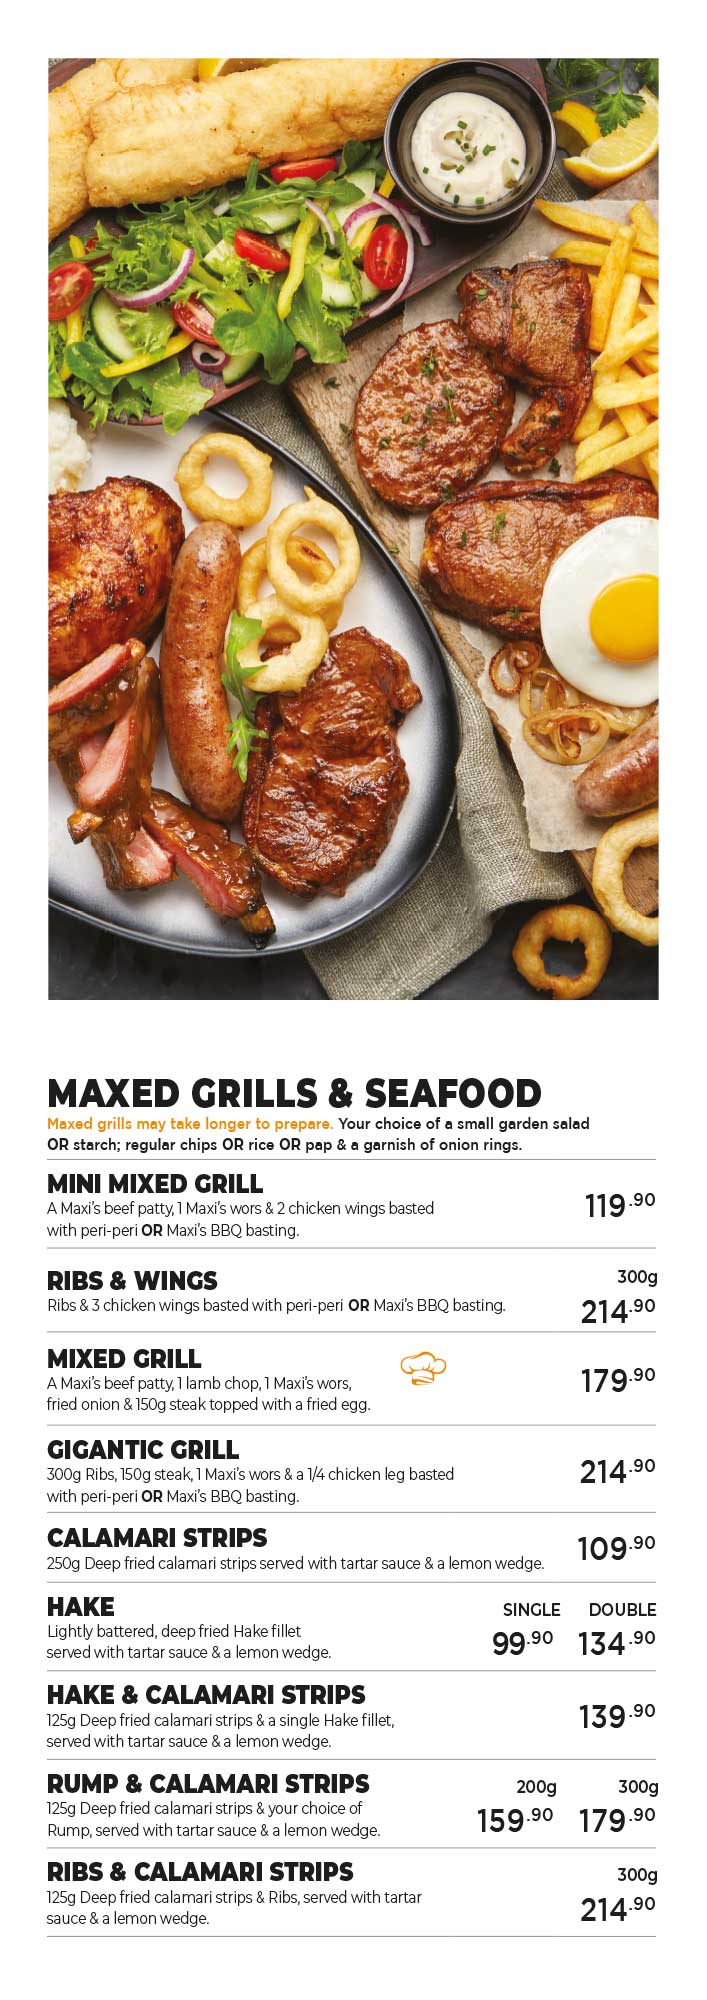 Maxi's Maxed Grills & Seafood